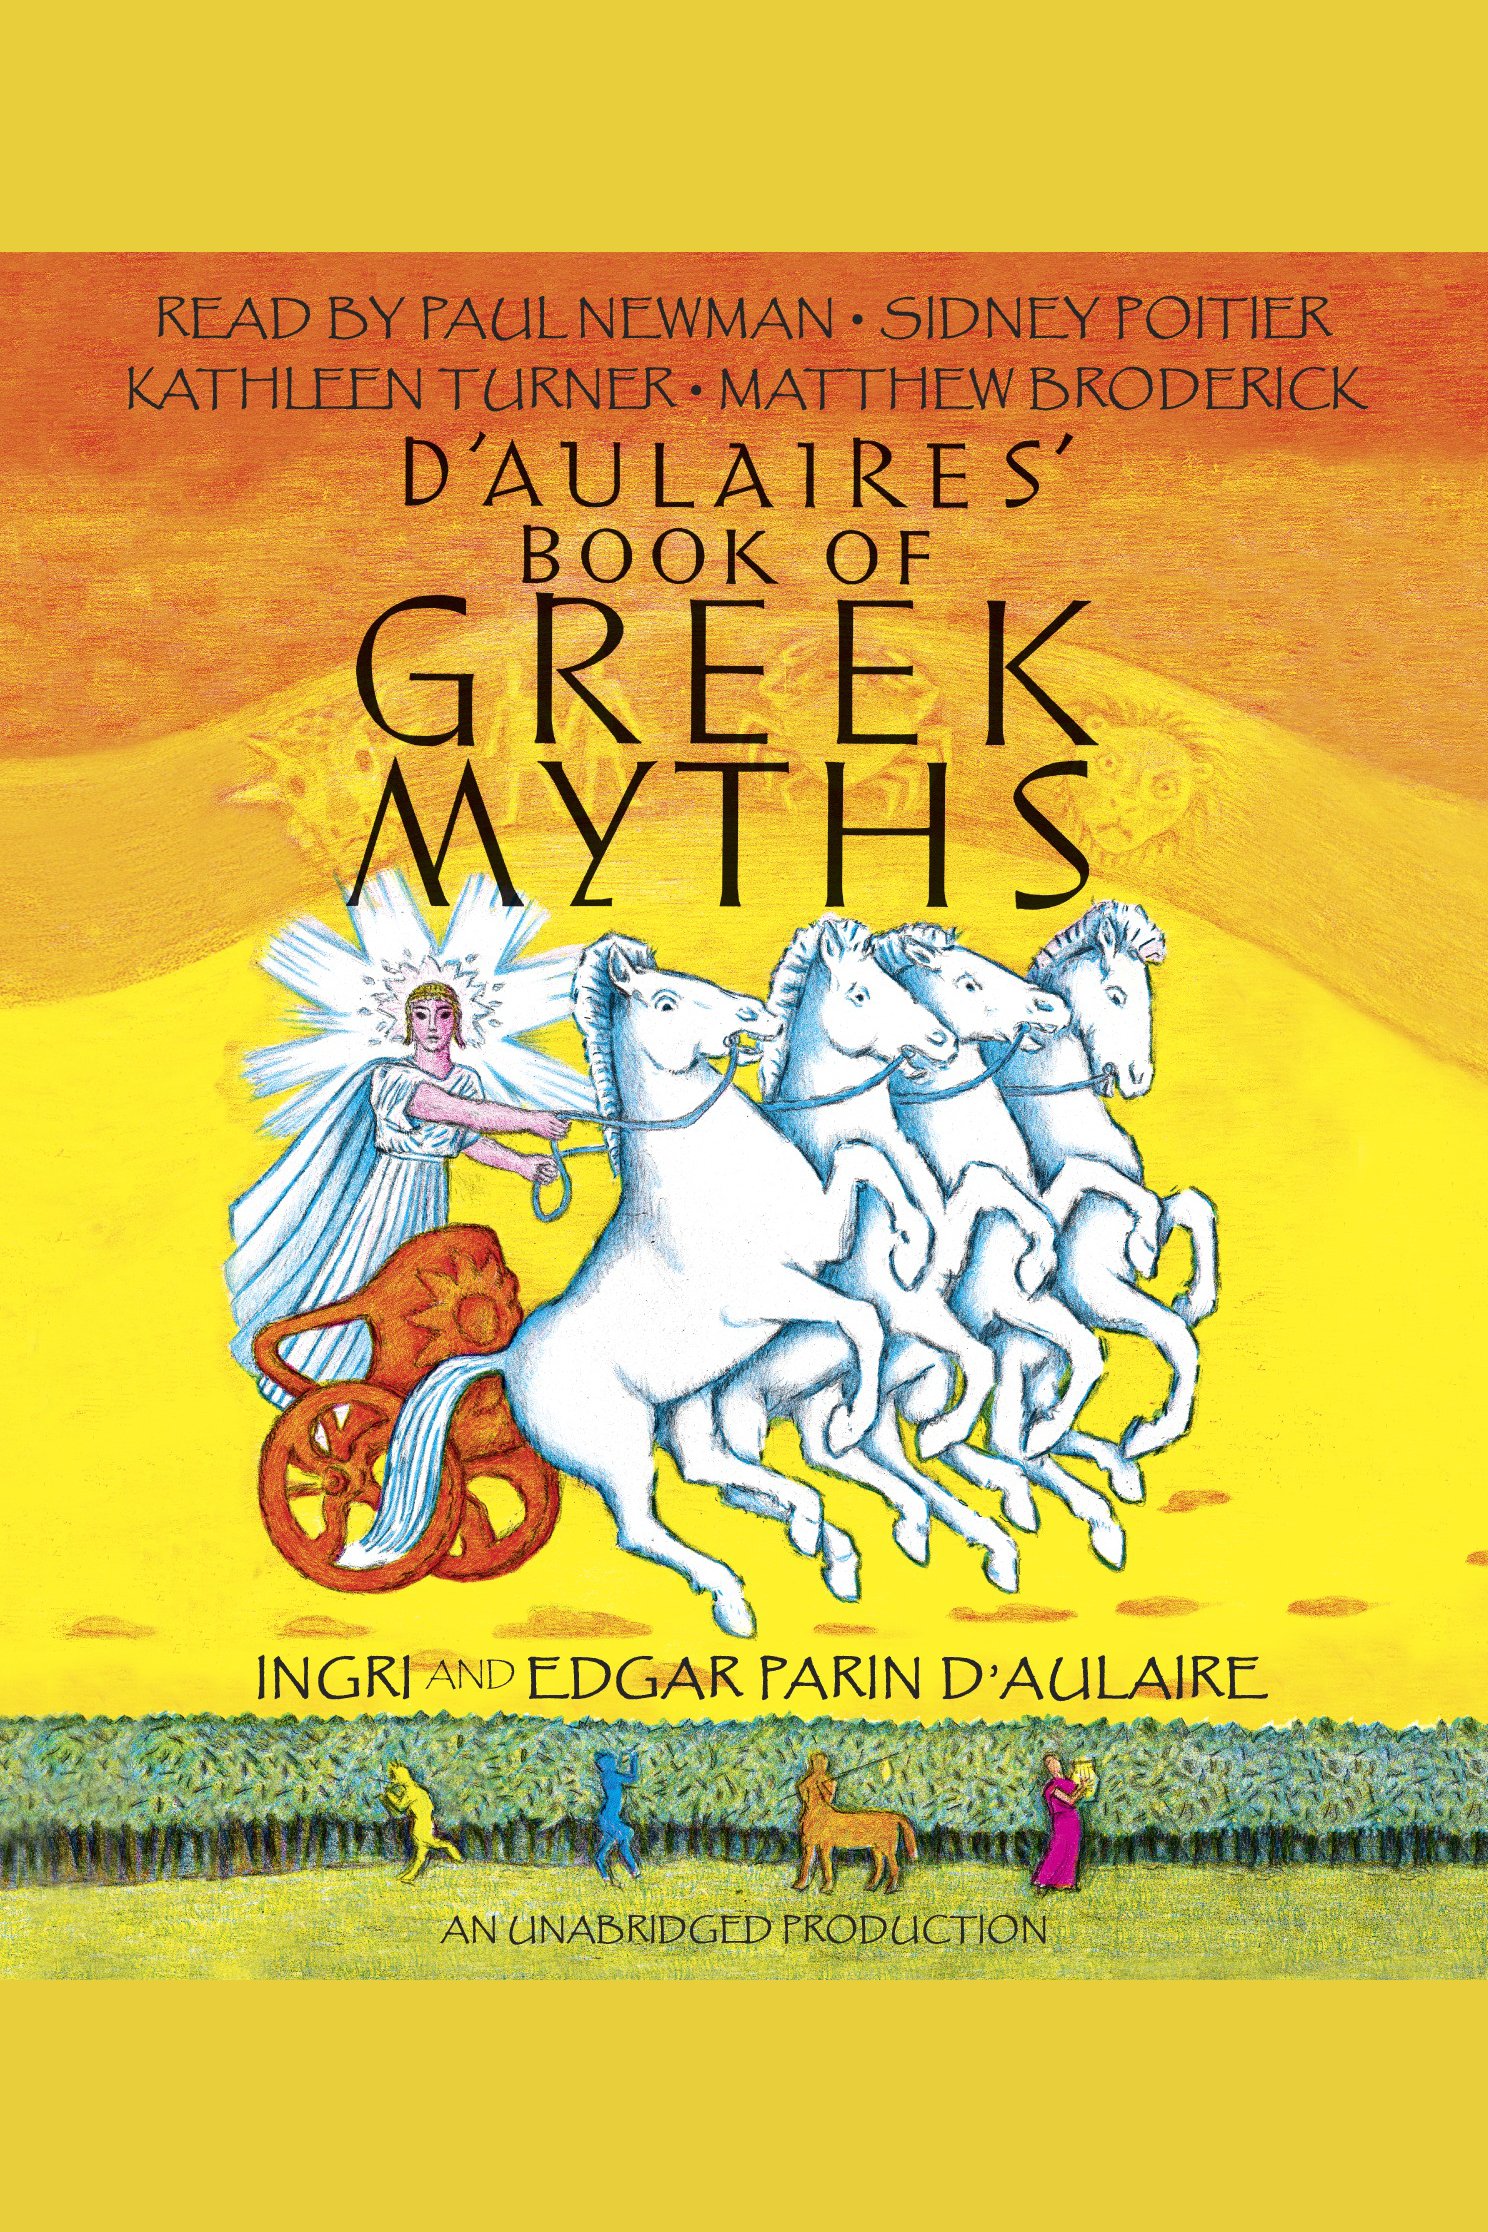 D'Aulaires' book of Greek myths cover image